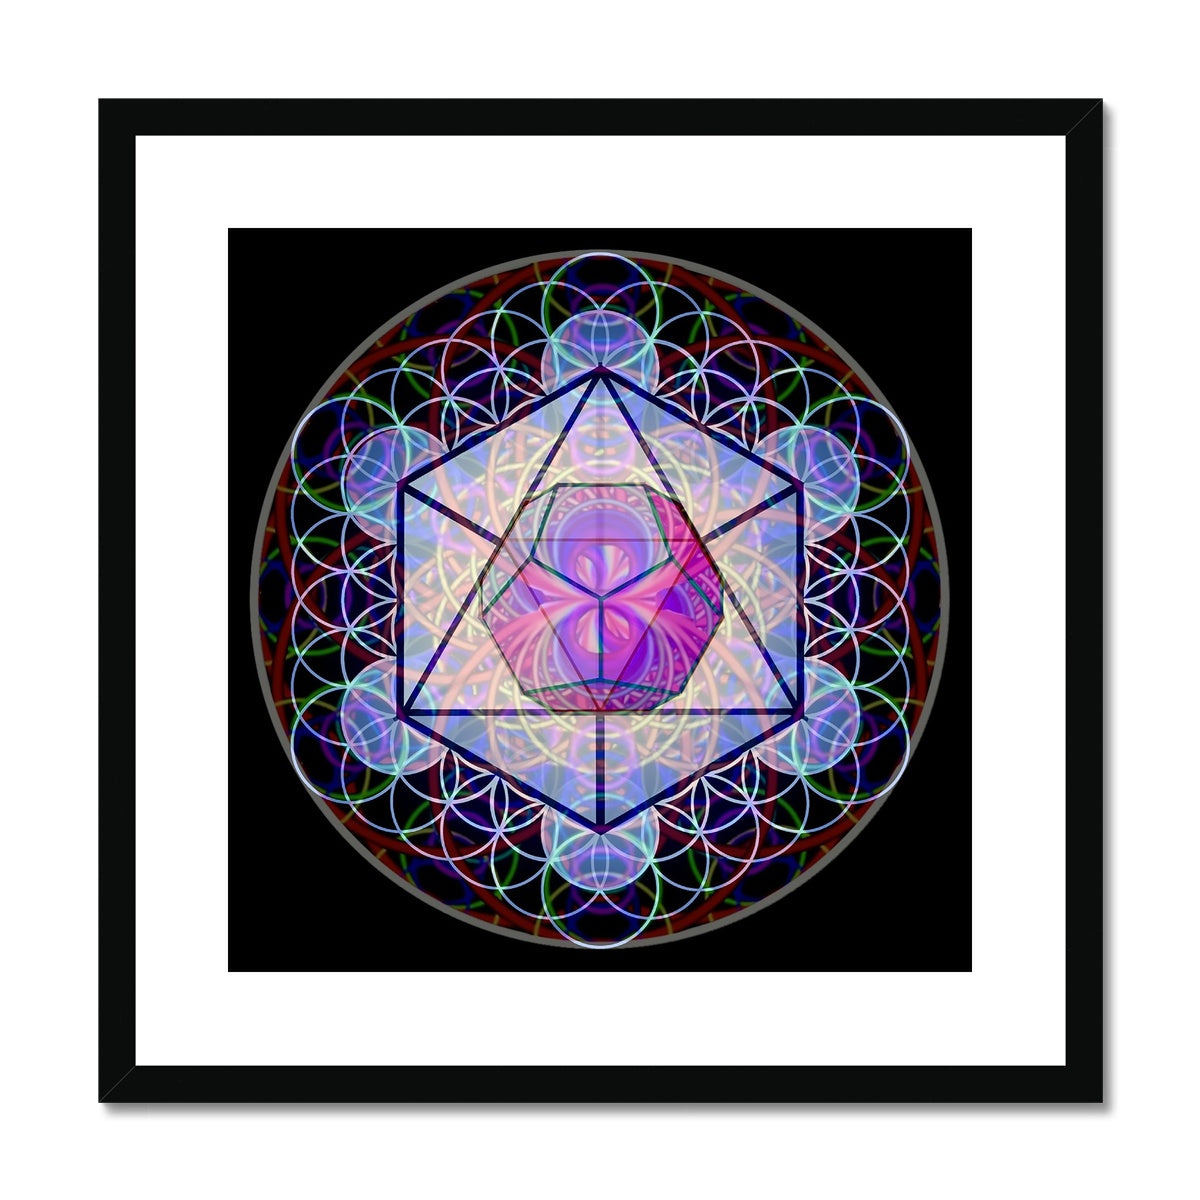 The Platonic Solid Dodecahedron with inverted Sound waves Framed & Mounted Print